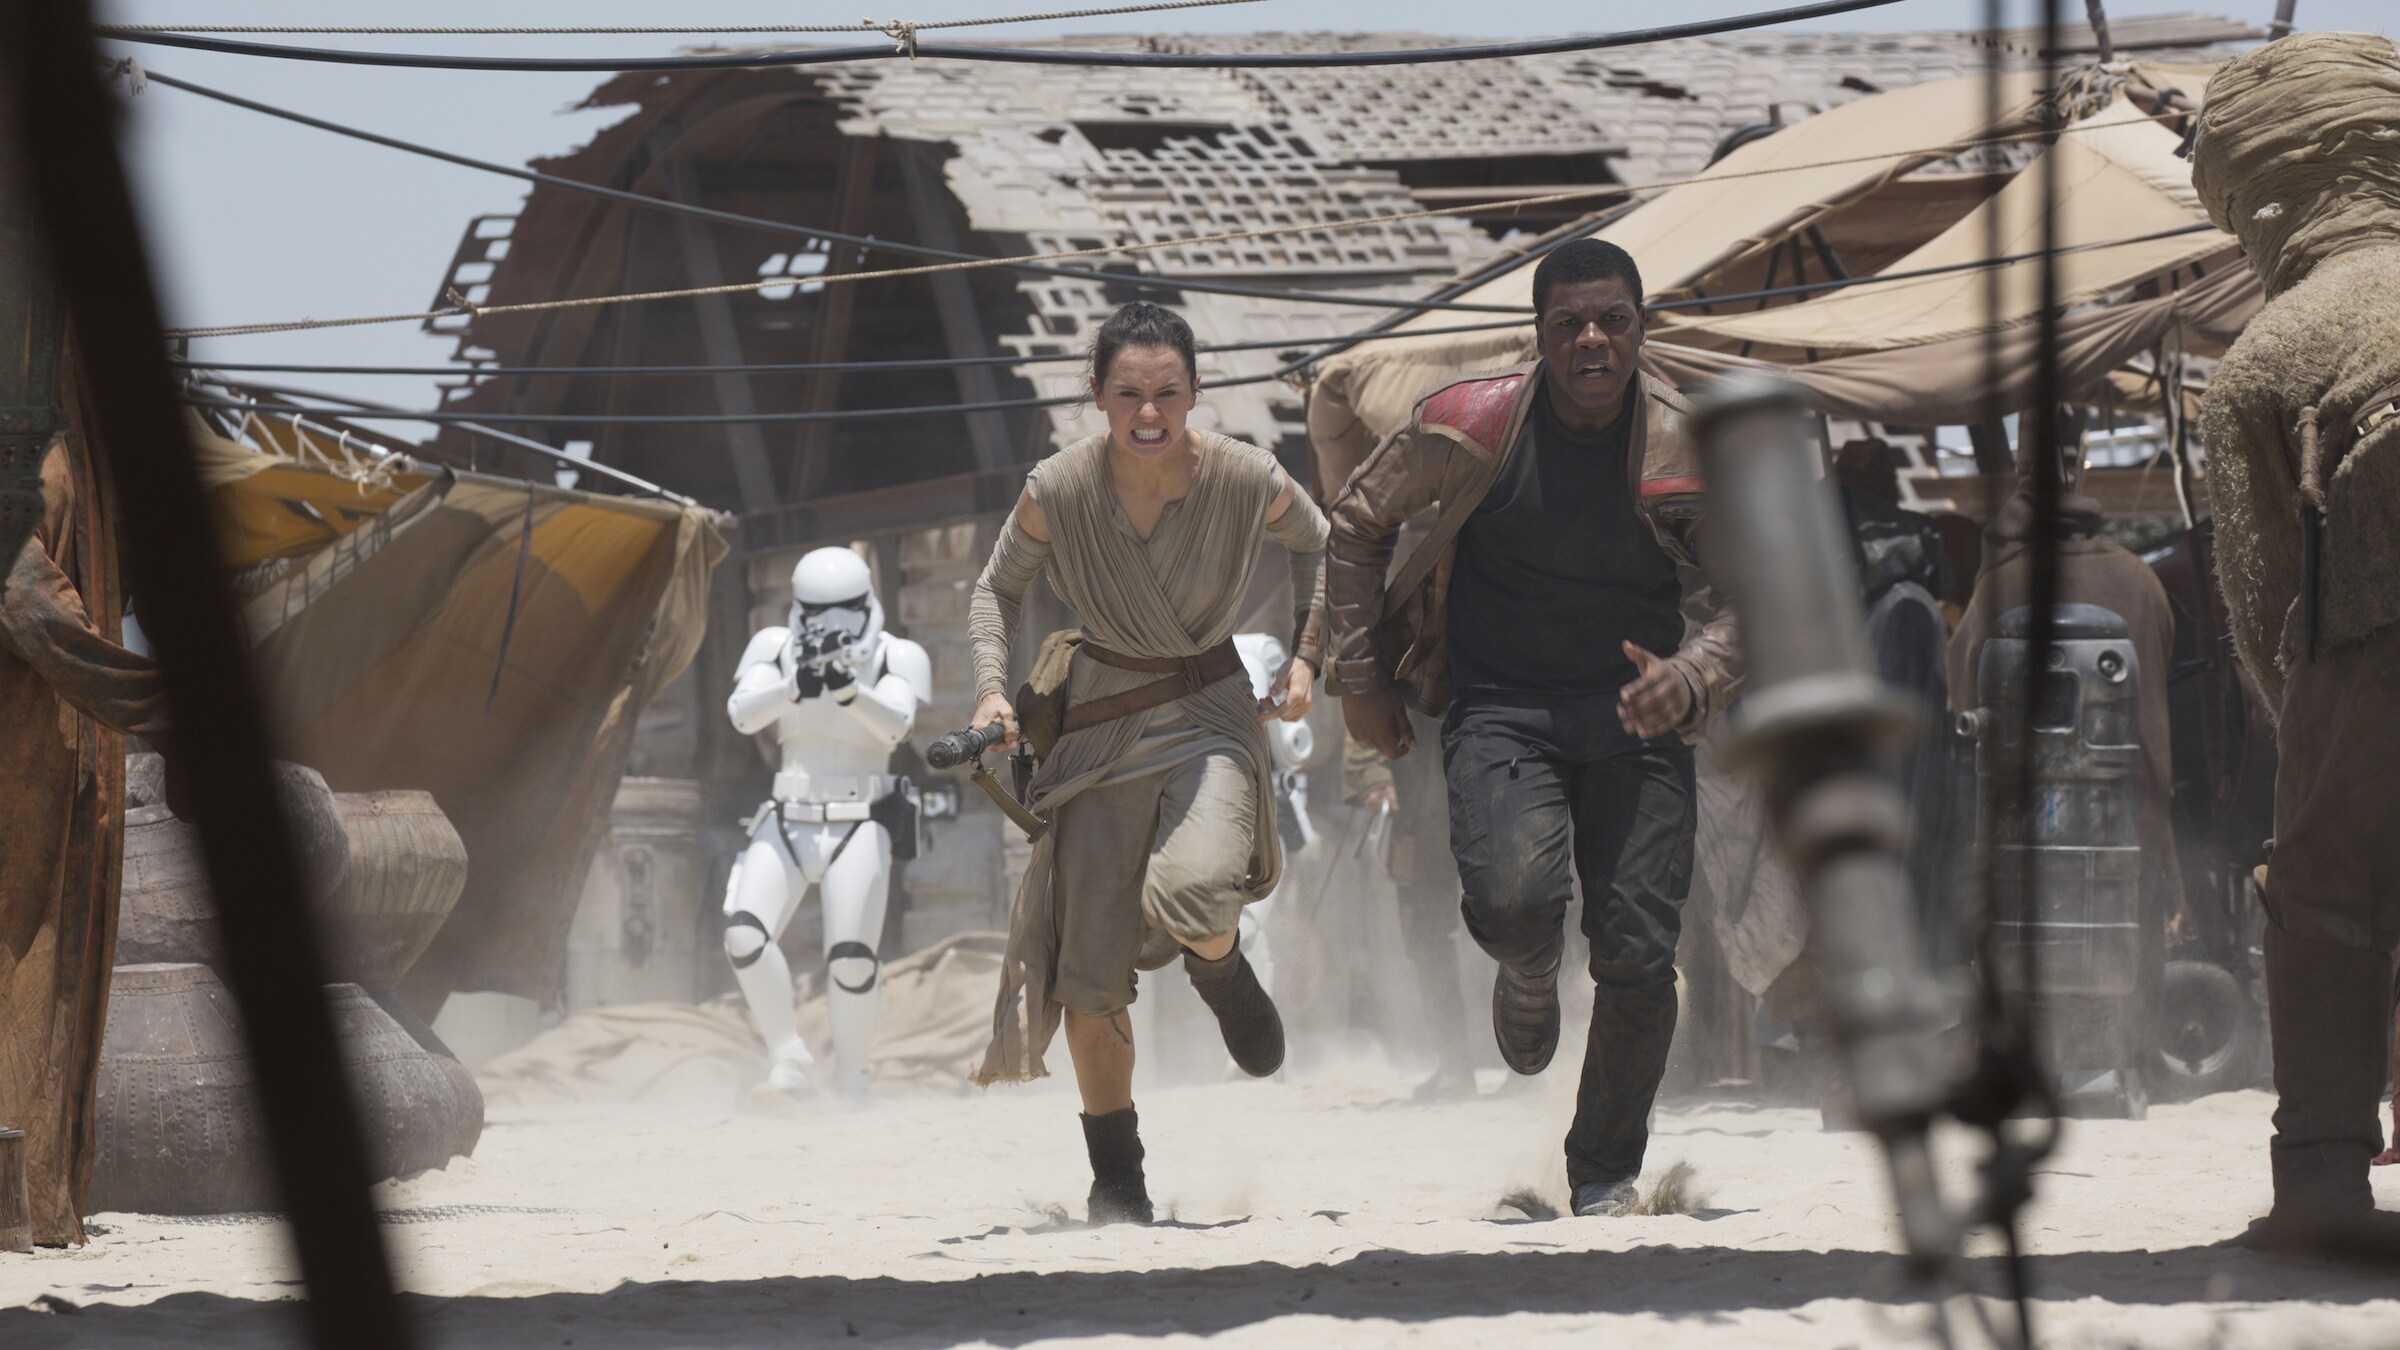 Studying Skywalkers: Dissecting Star Wars: The Force Awakens with a Rebel Hero